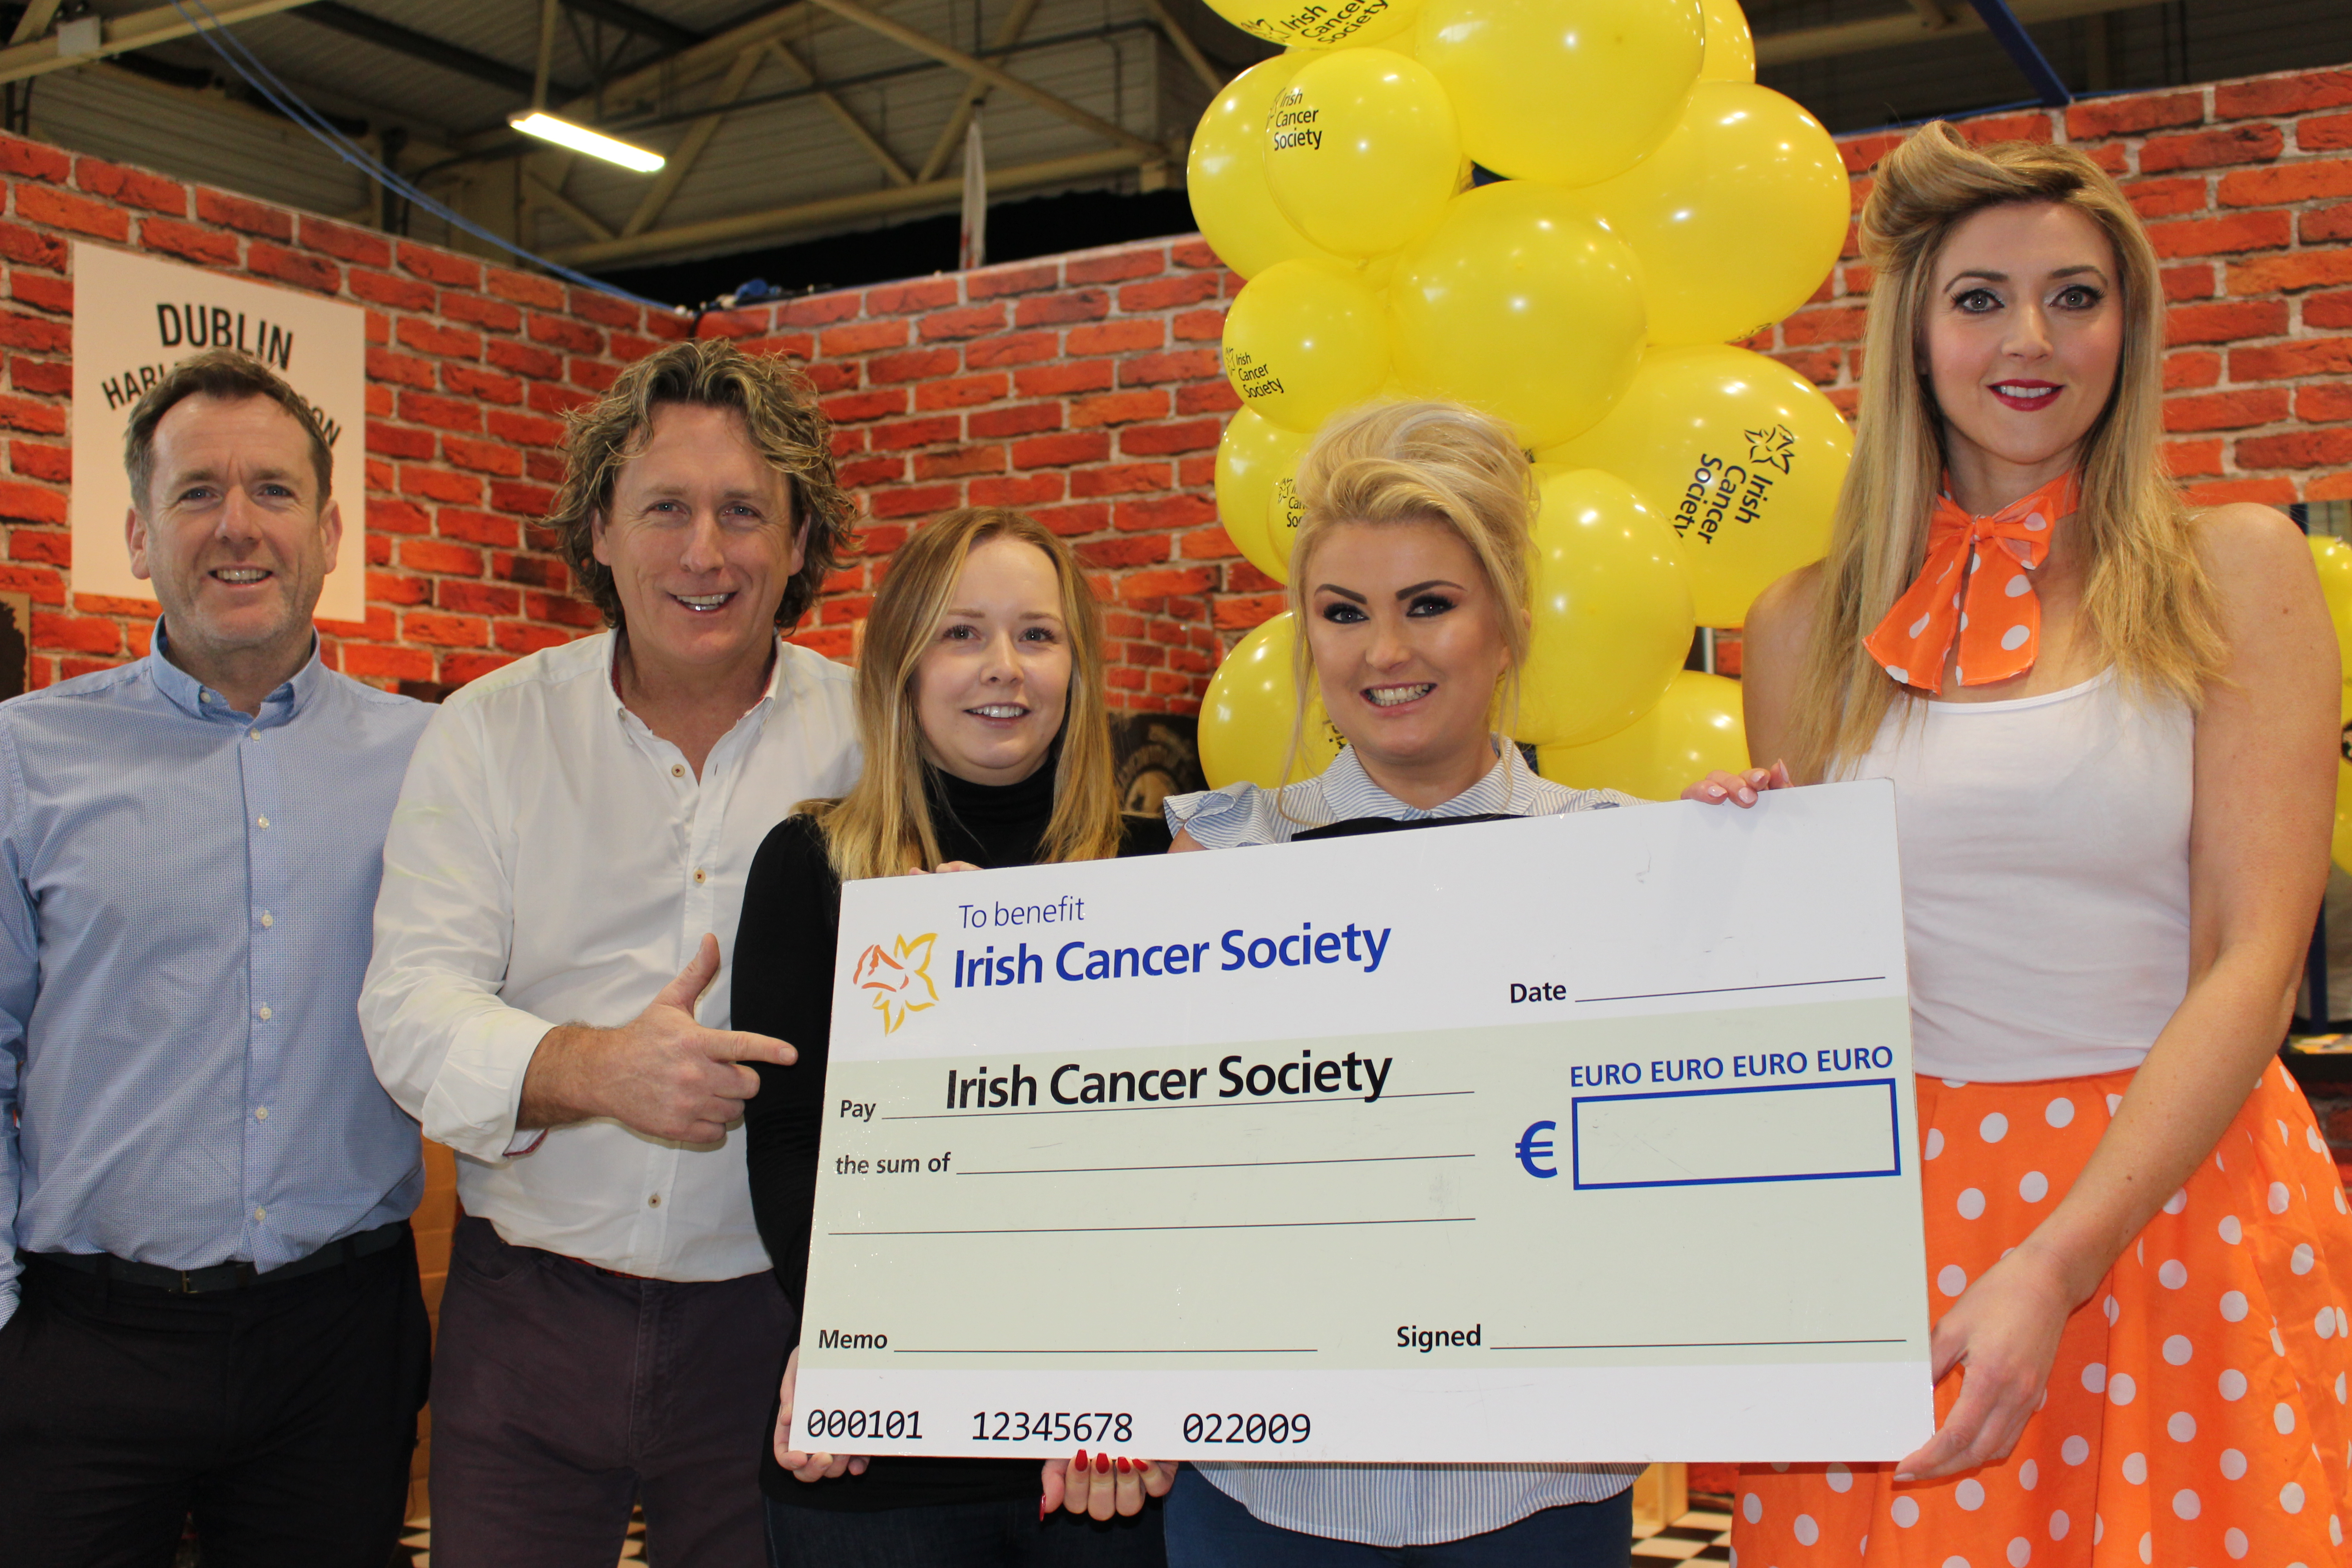 Grafton Barber employees fundraising for the Irish Cancer Society